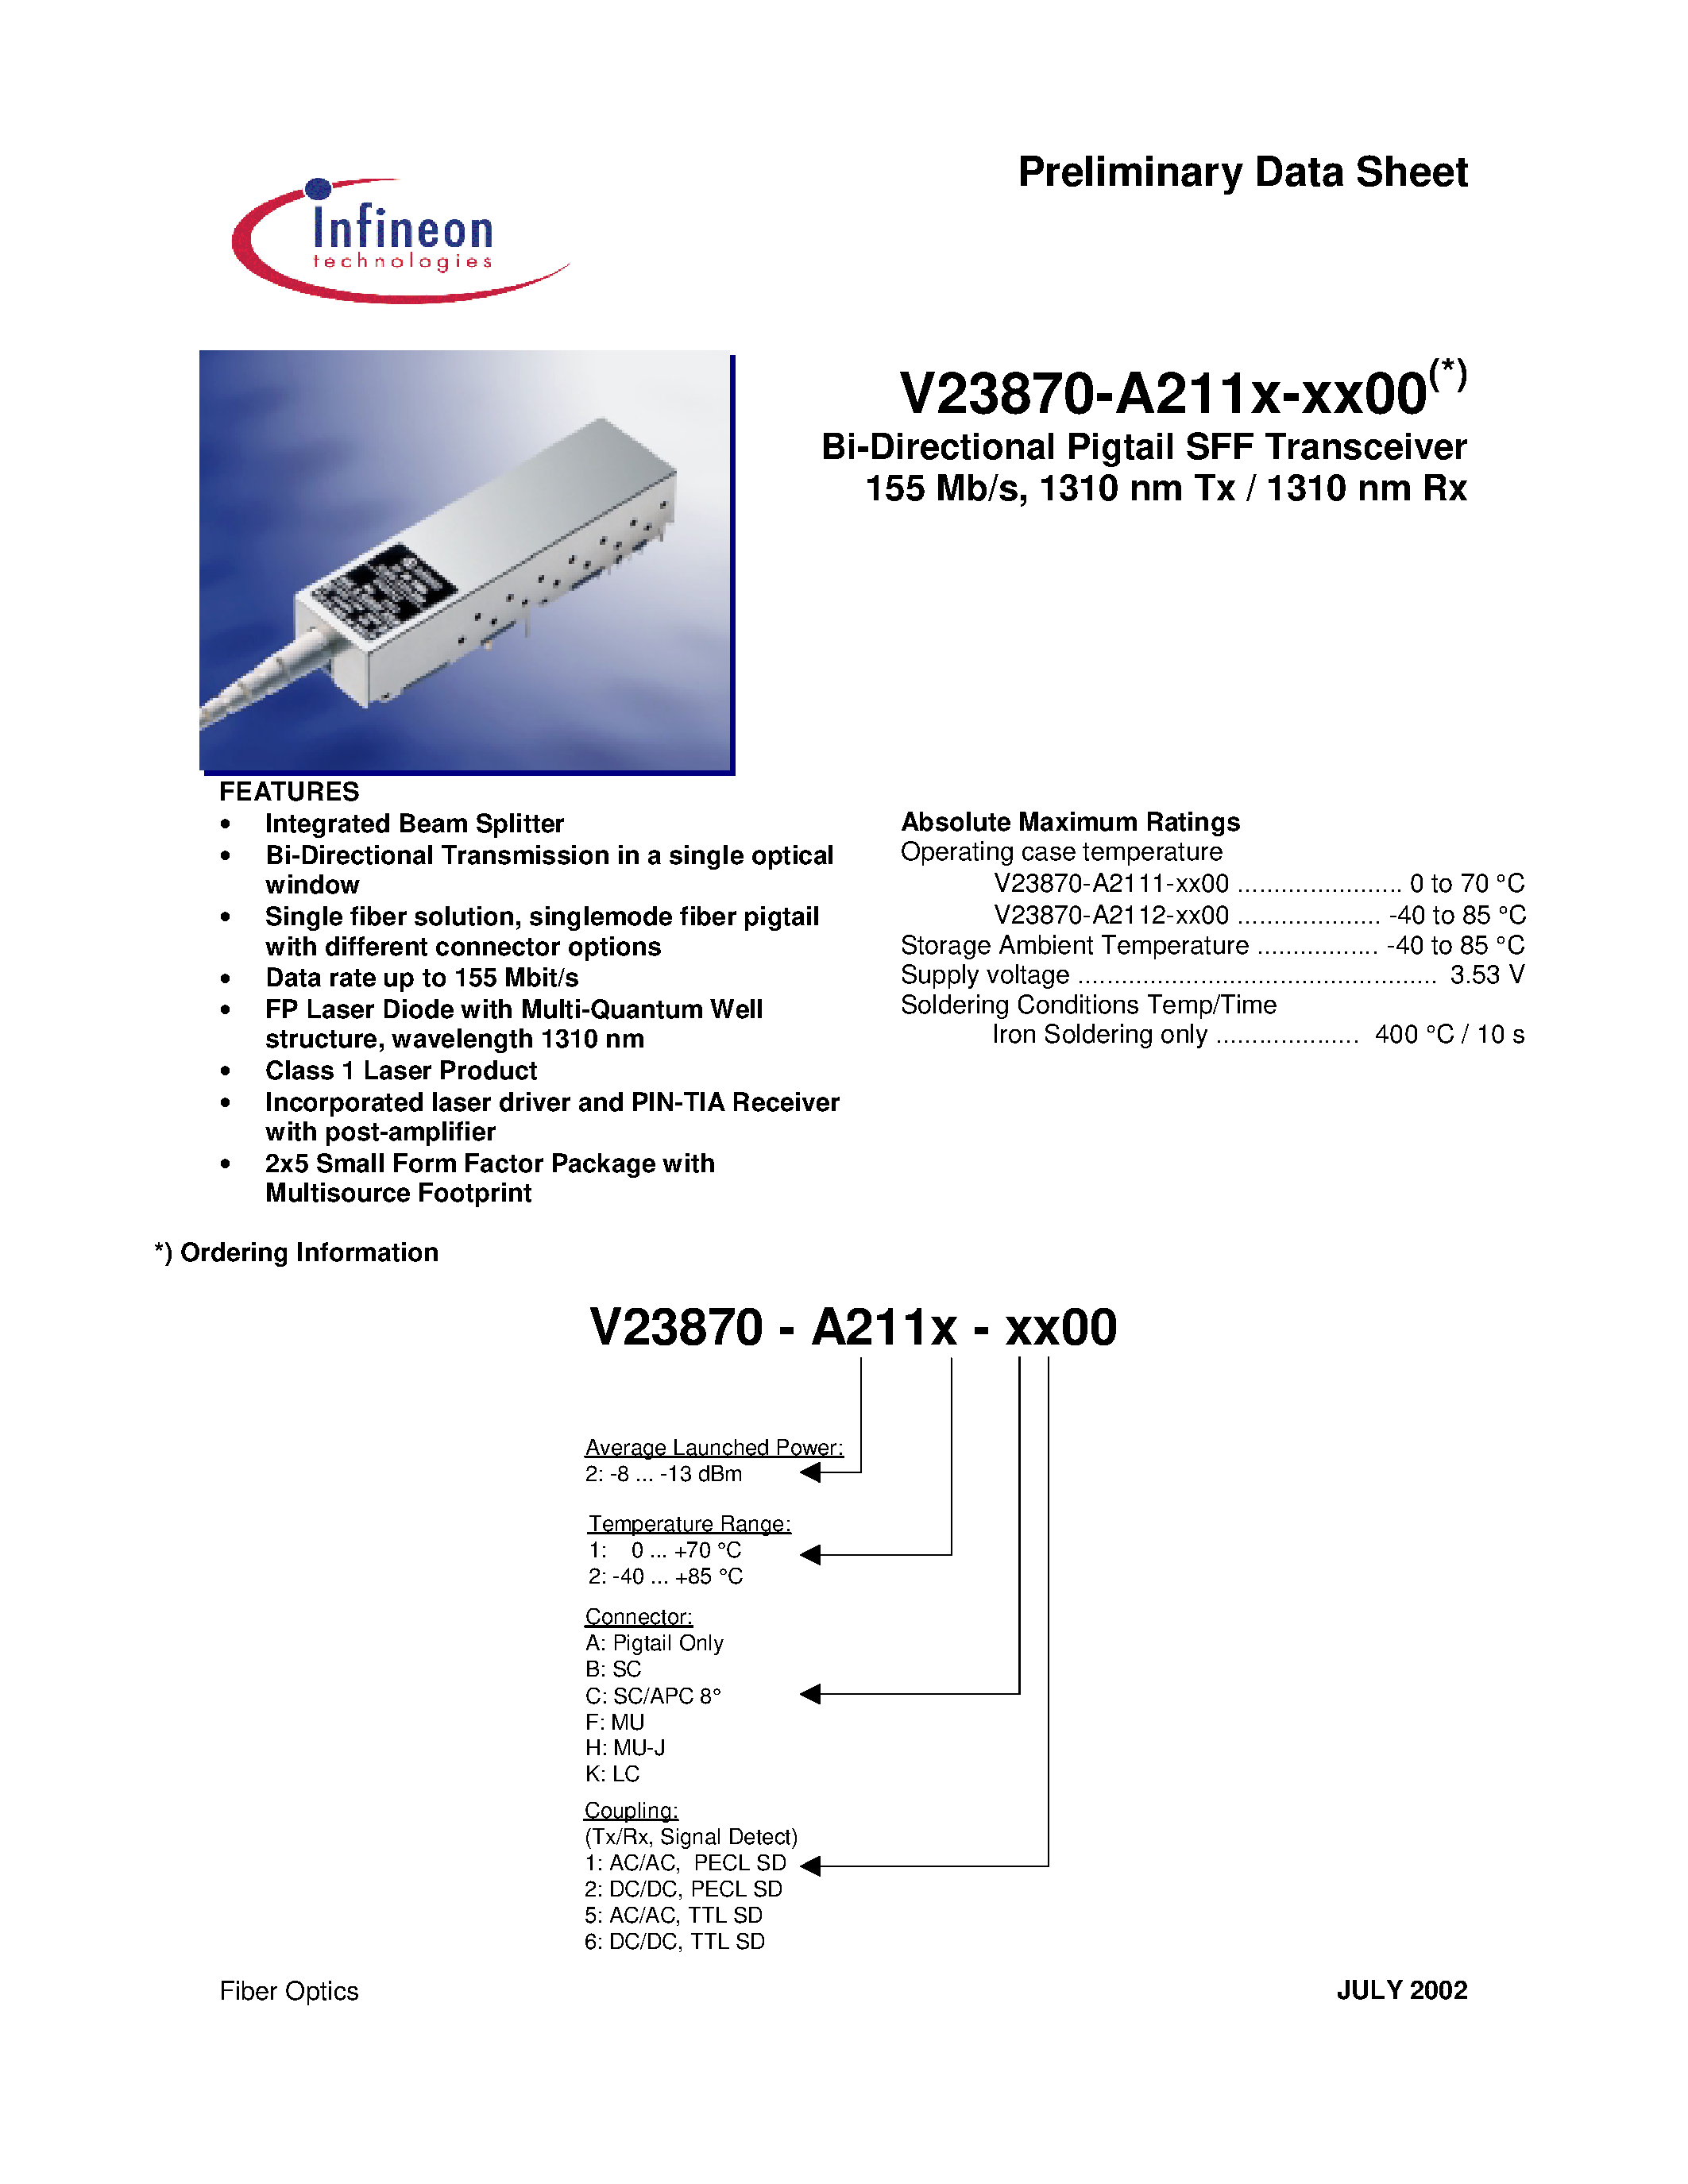 Datasheet V23870-A2112-H500 - Bi-Directional Pigtail SFF Transceiver 155 Mb/s/ 1310 nm Tx / 1310 nm Rx page 1